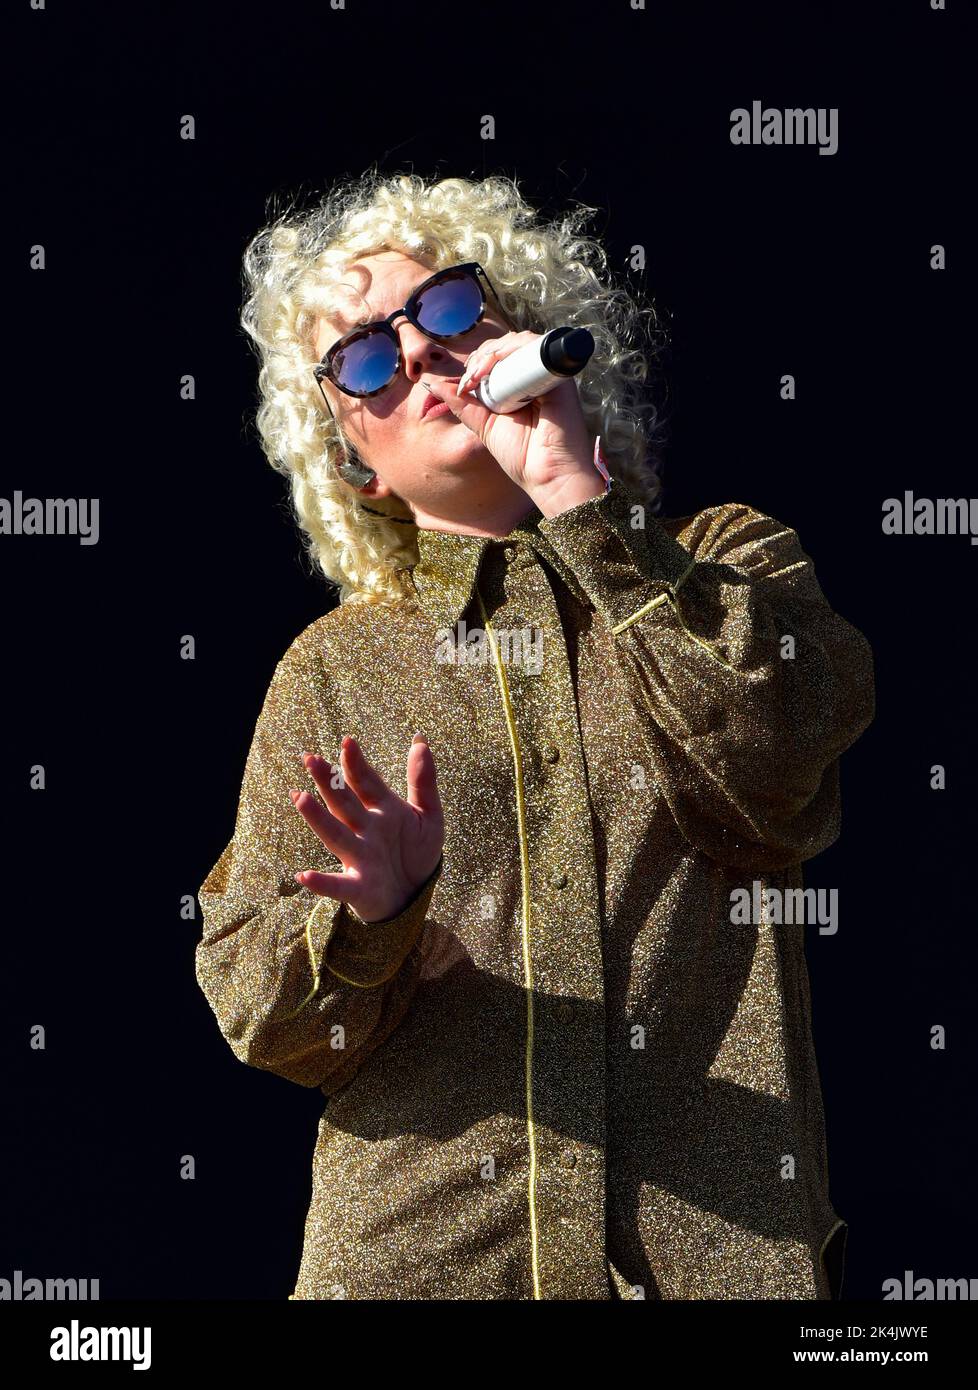 Redondo Beach, California September 17, 2022 - Cam performing on stage at BeachLife Ranch, Credit - Ken Howard/Alamy Stock Photo